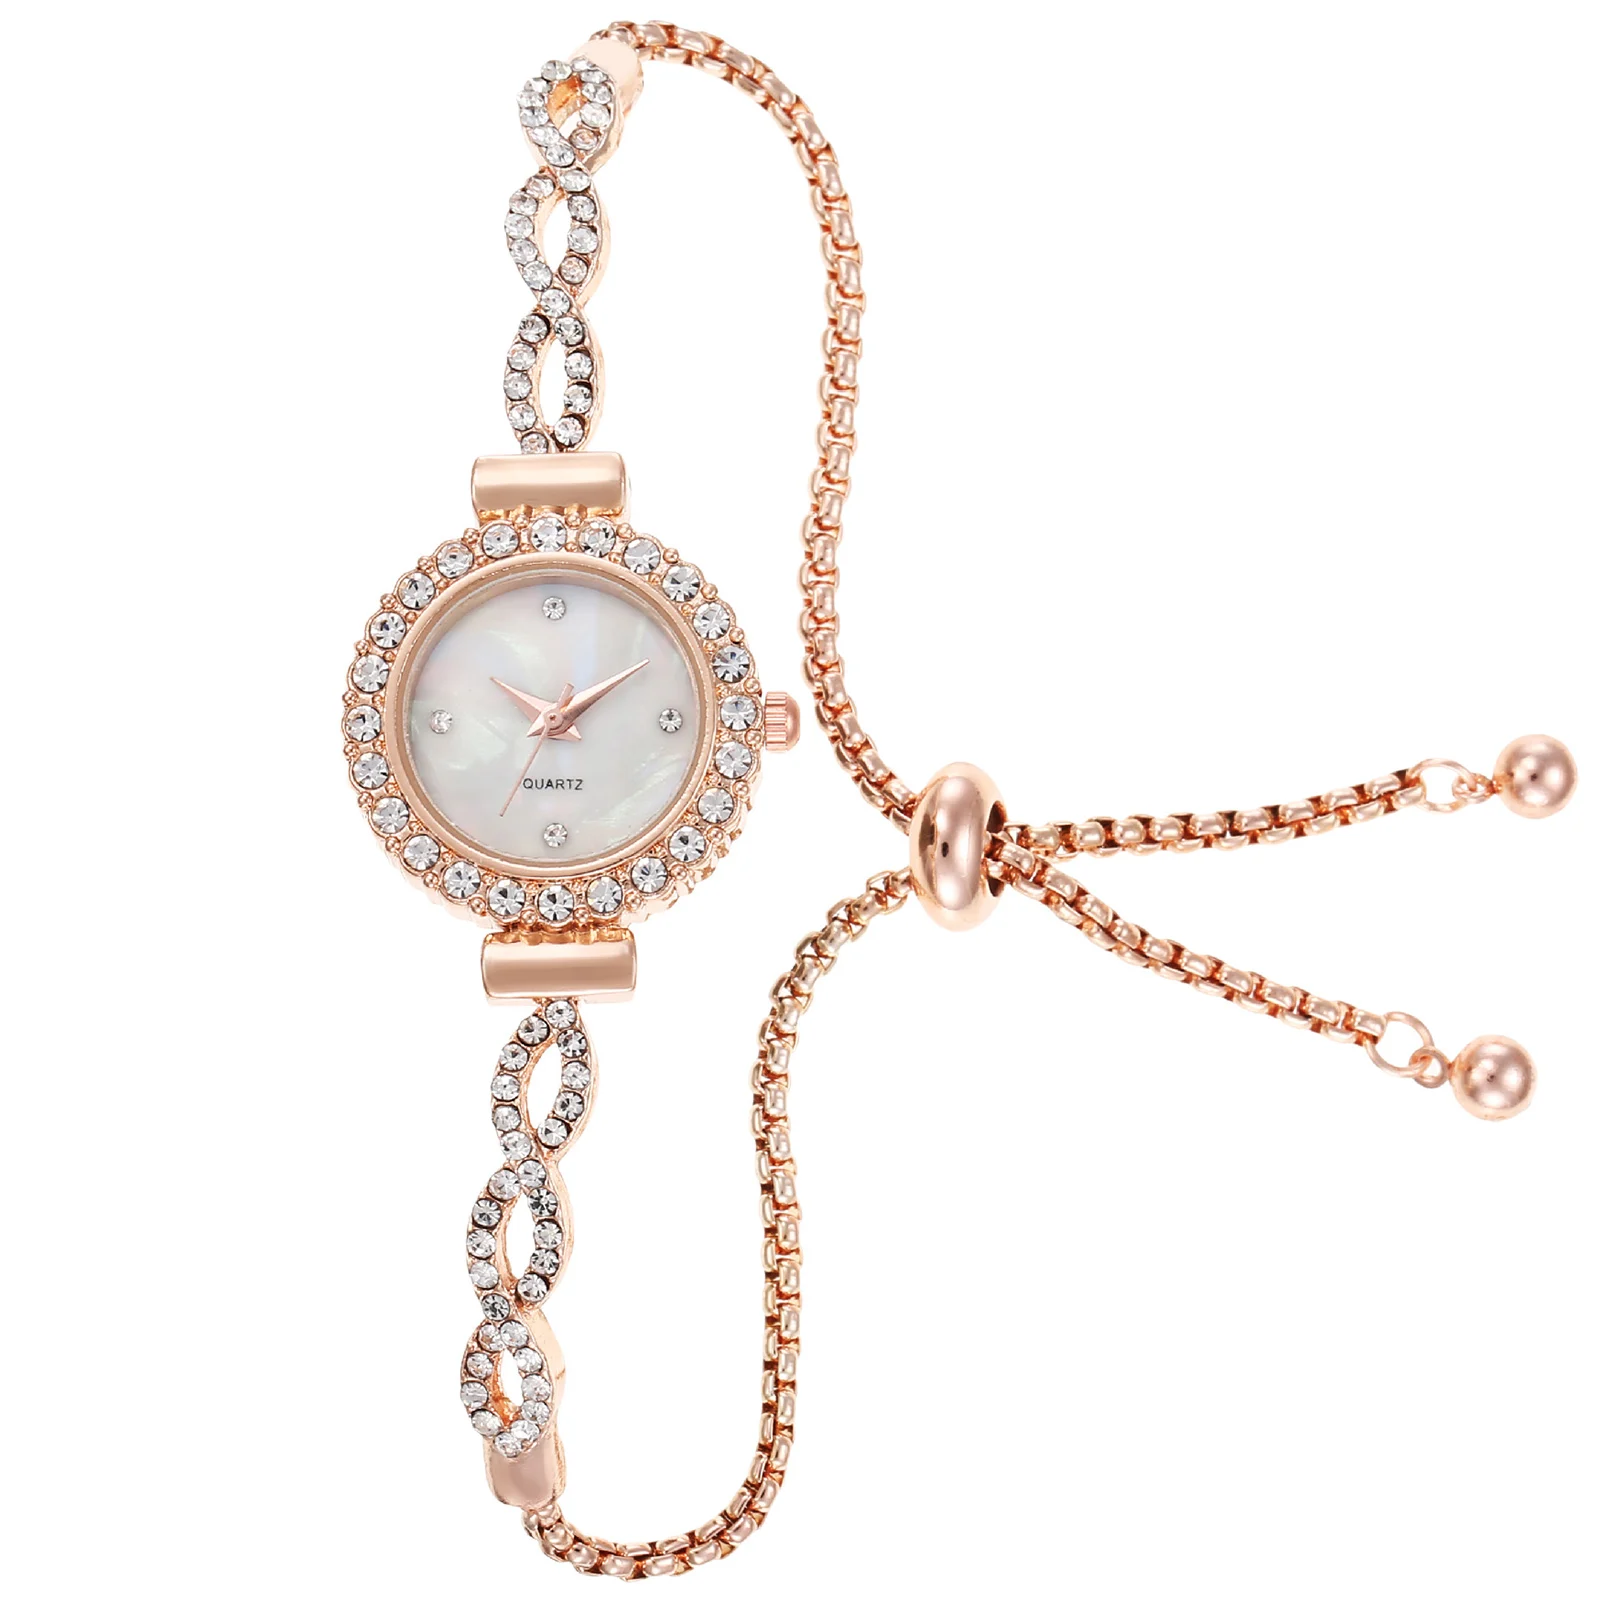 

Women's Rhinestones Setting Bracelet Watch Easy to Read Round Dial Chain Band Watch for Working and Office